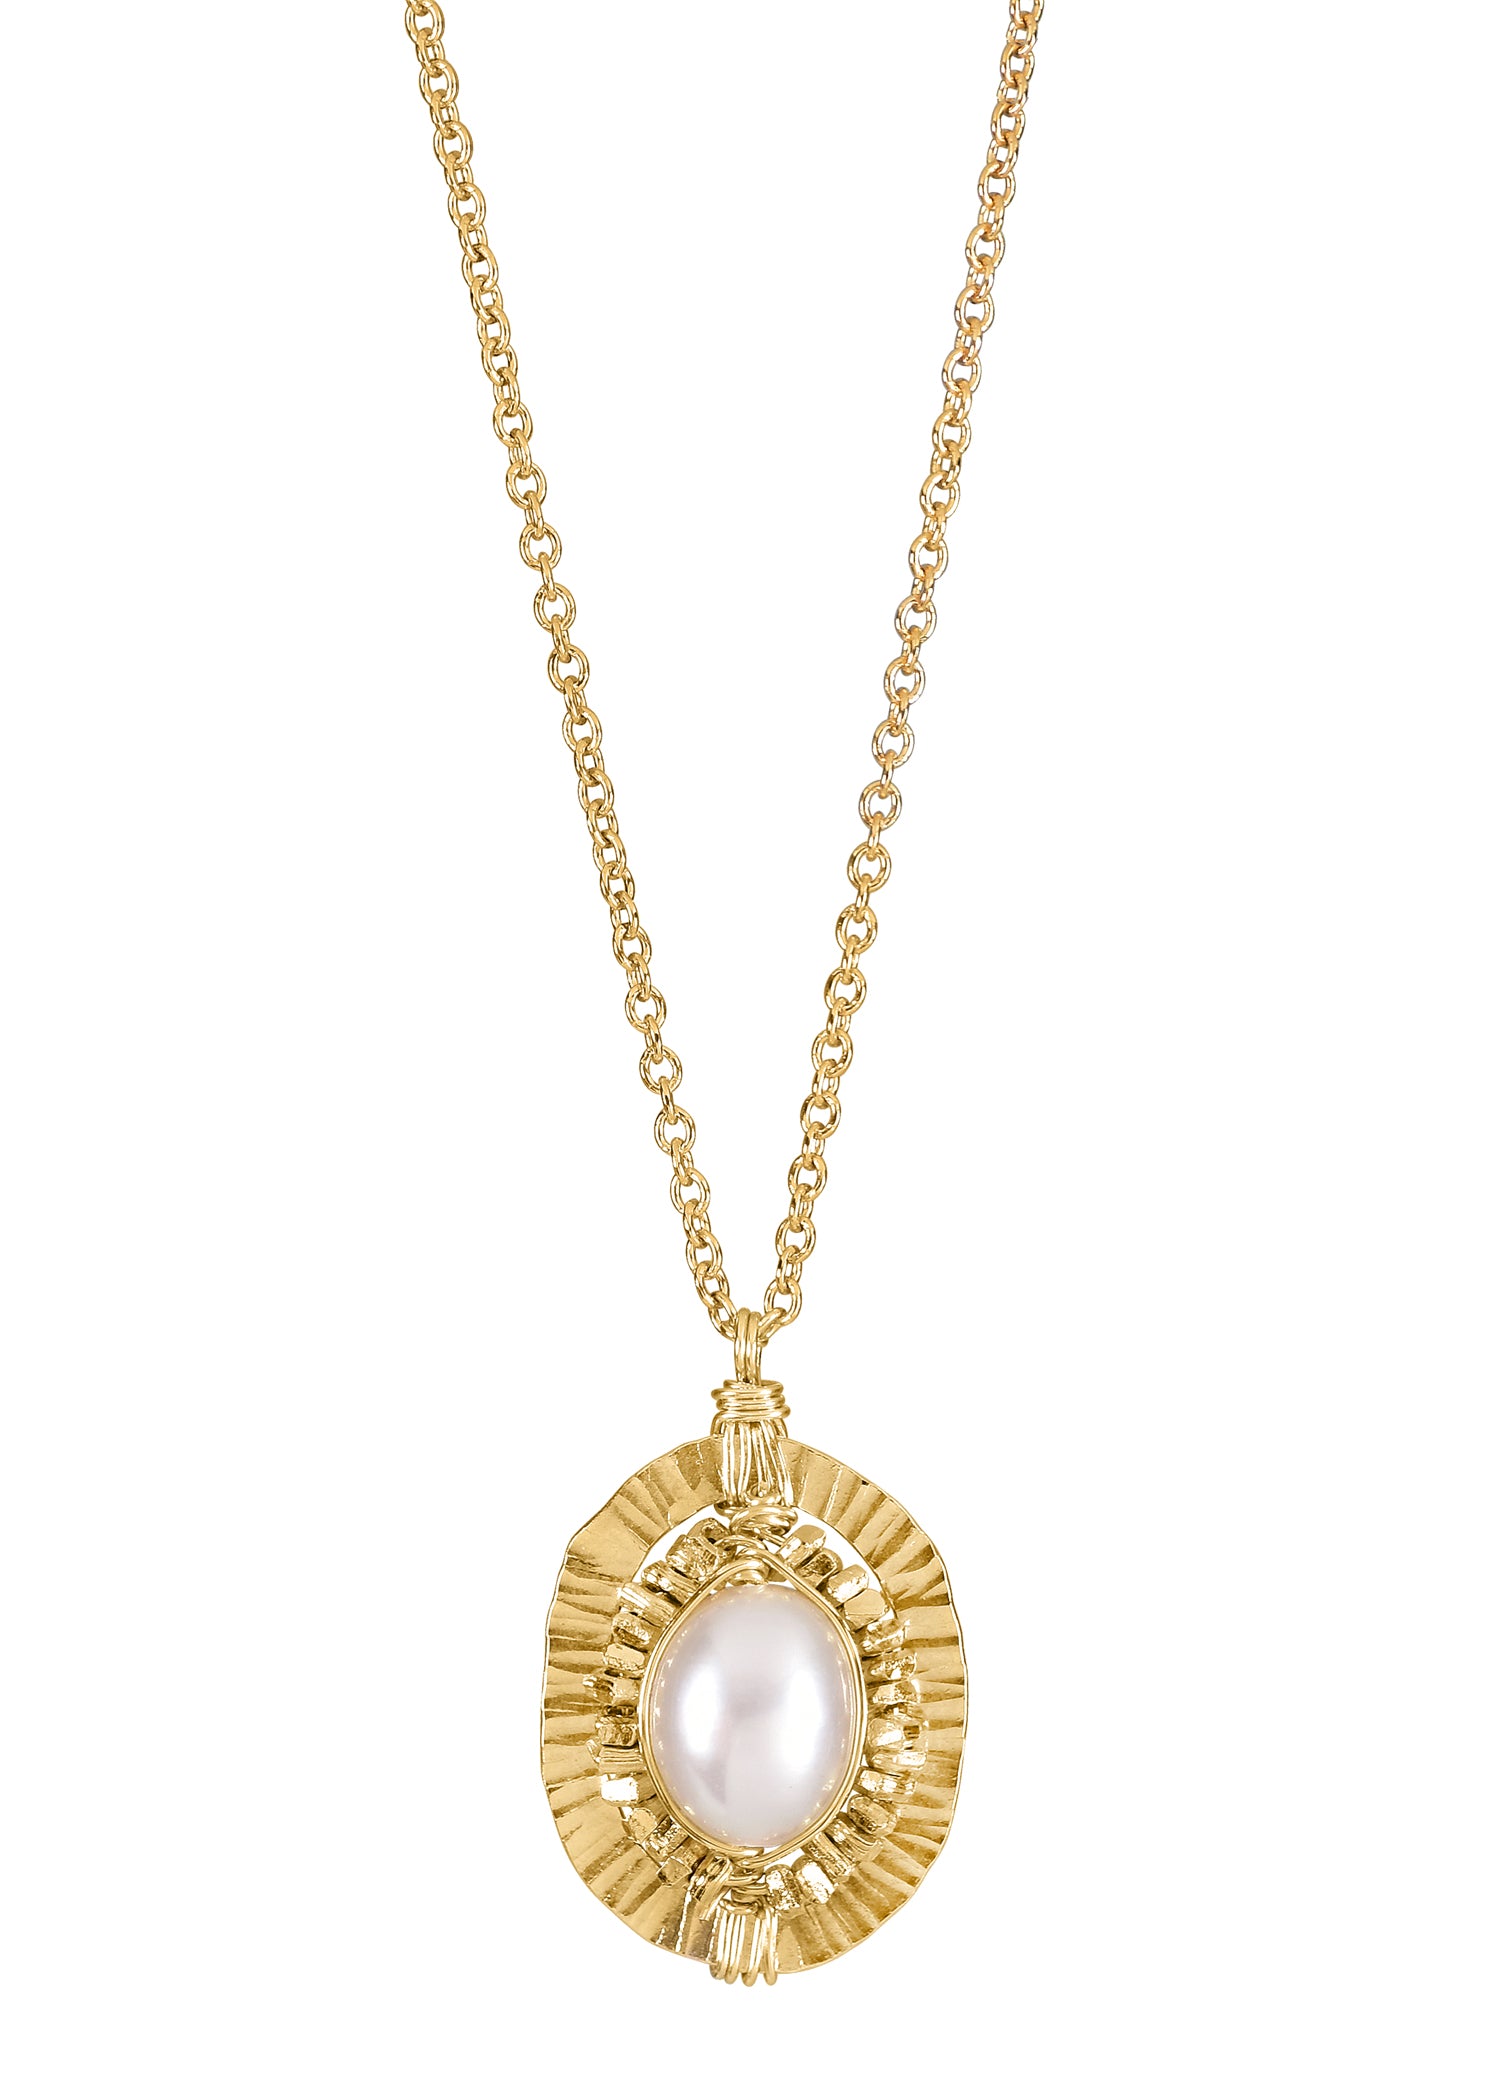 Freshwater pearl 14k gold fill 14k gold vermeil sterling silver beads Necklace measures 17" in length Pendant measures 9/16" in length and 7/16" in width Handmade in our Los Angeles studio